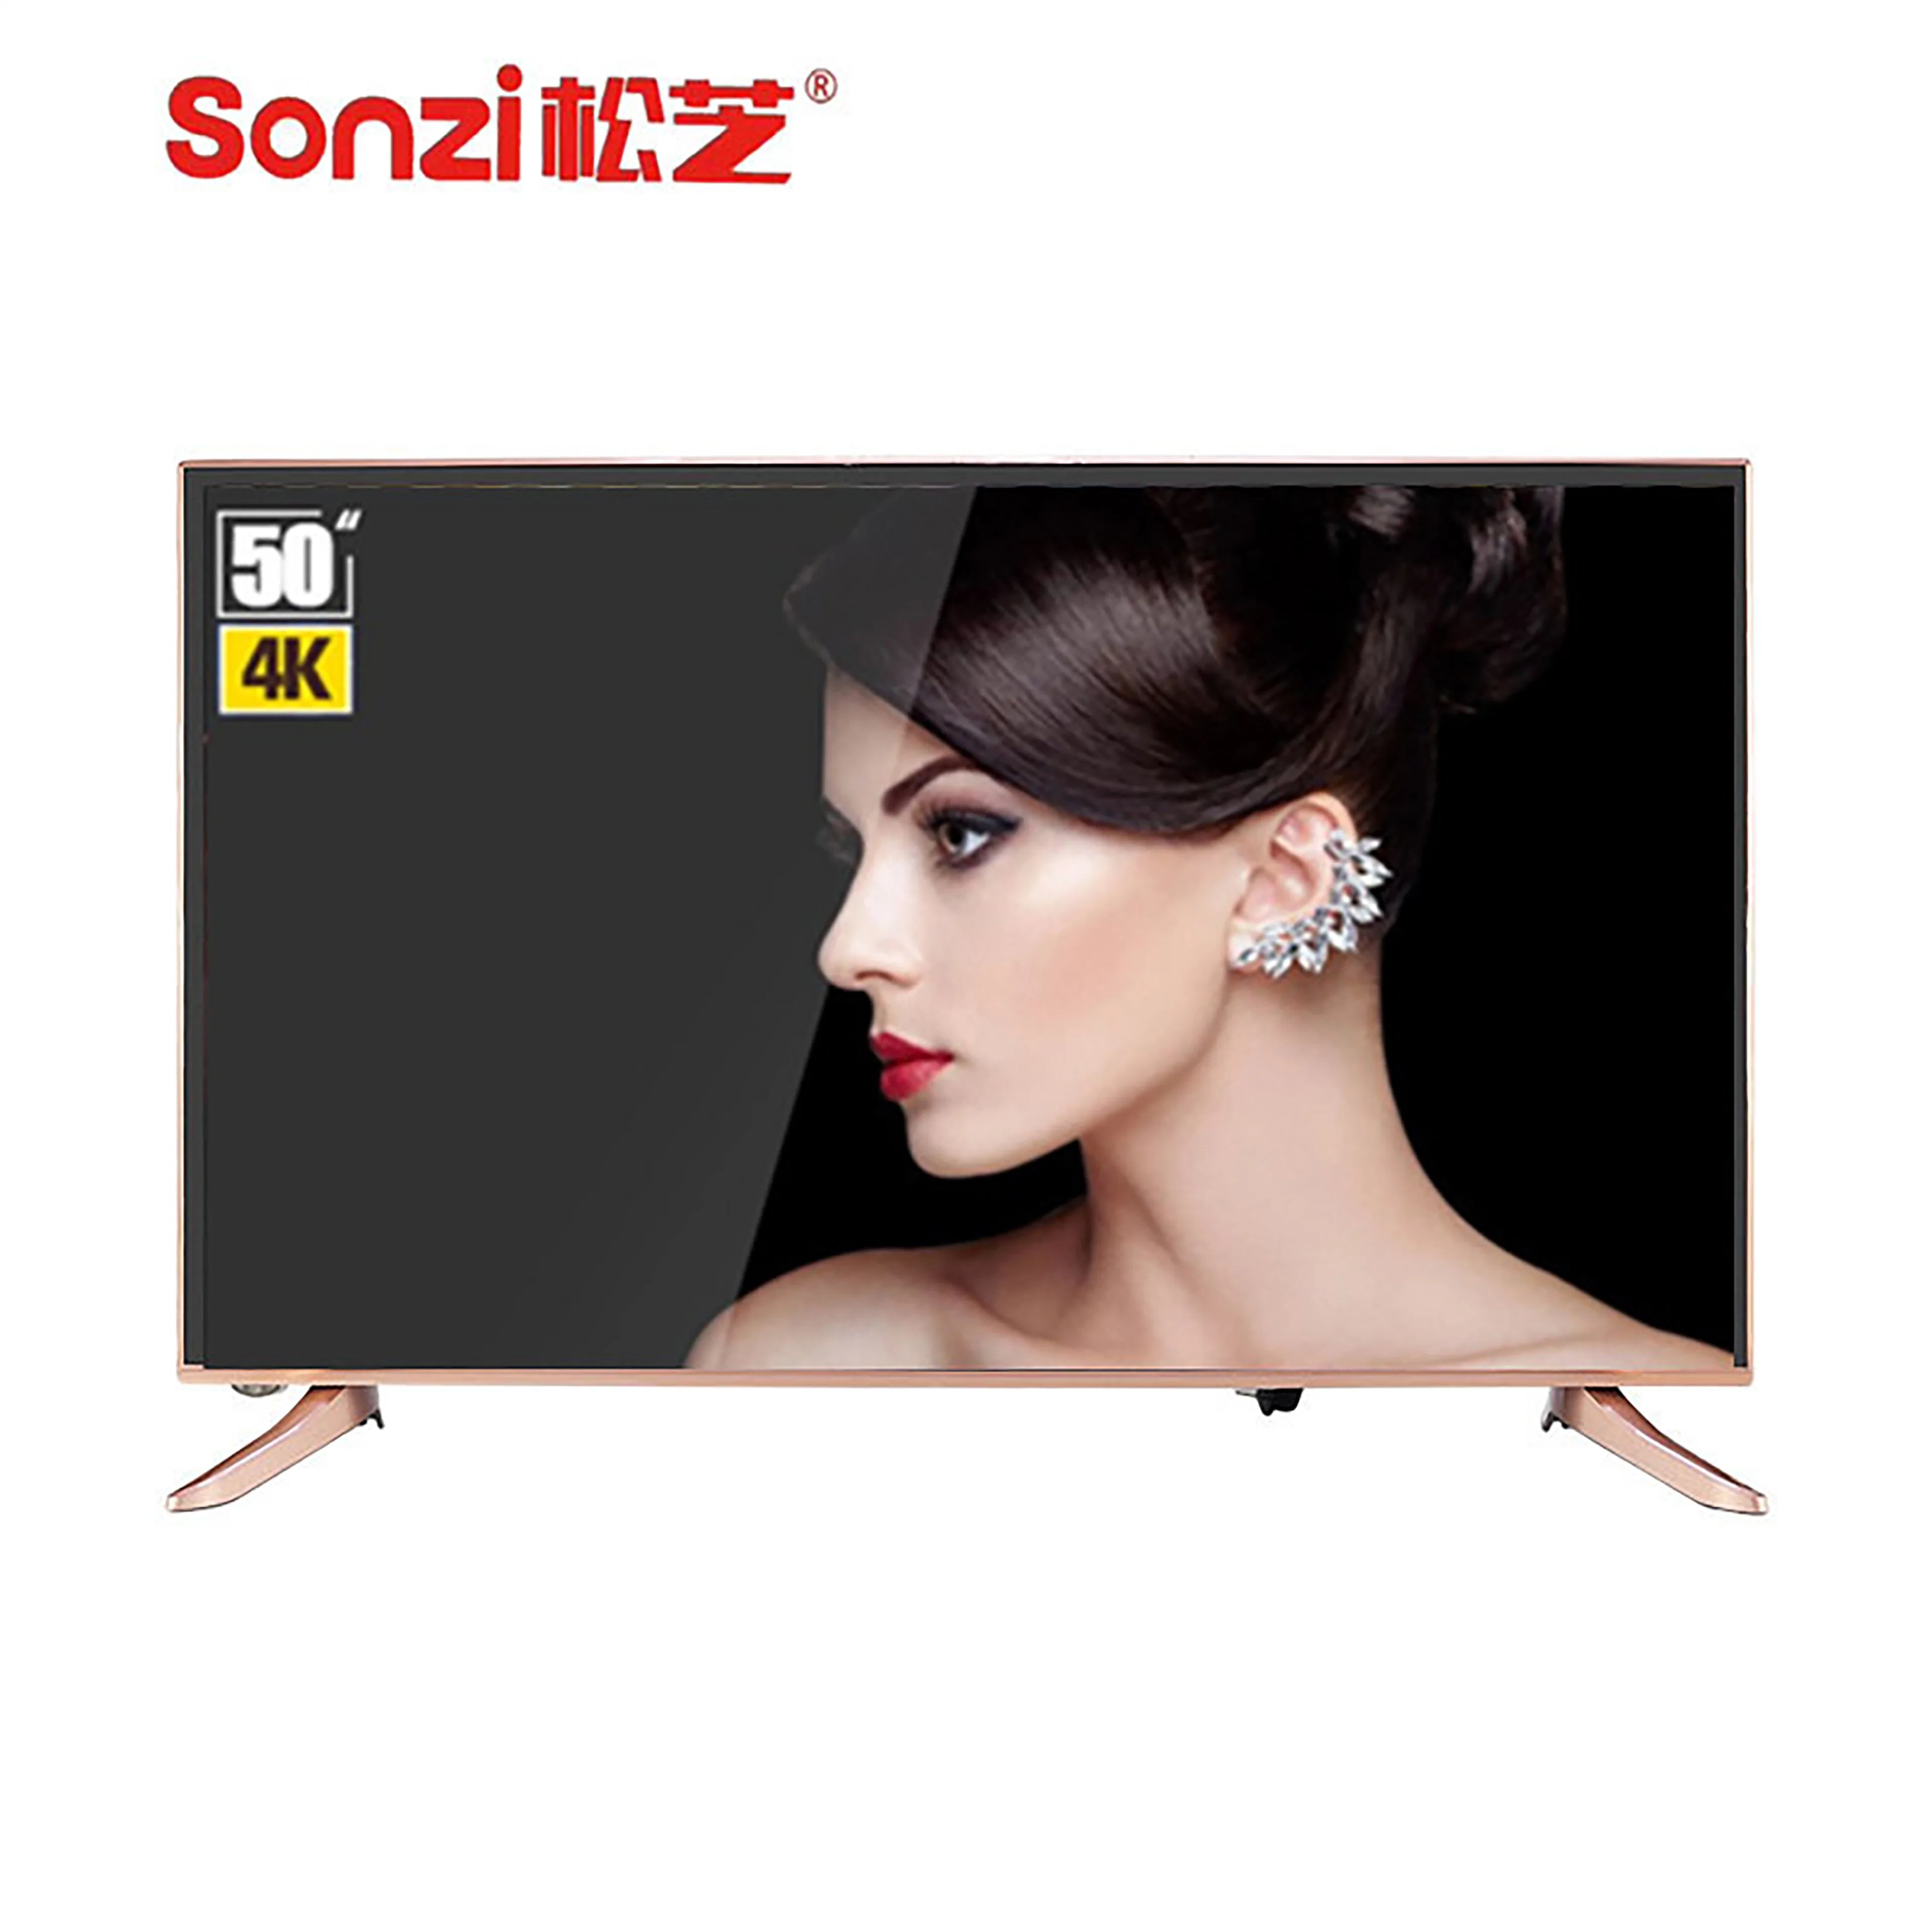 32 40 43 50 55 Inch LED TV Smart TV Manufacture in China Best Price Televison Display